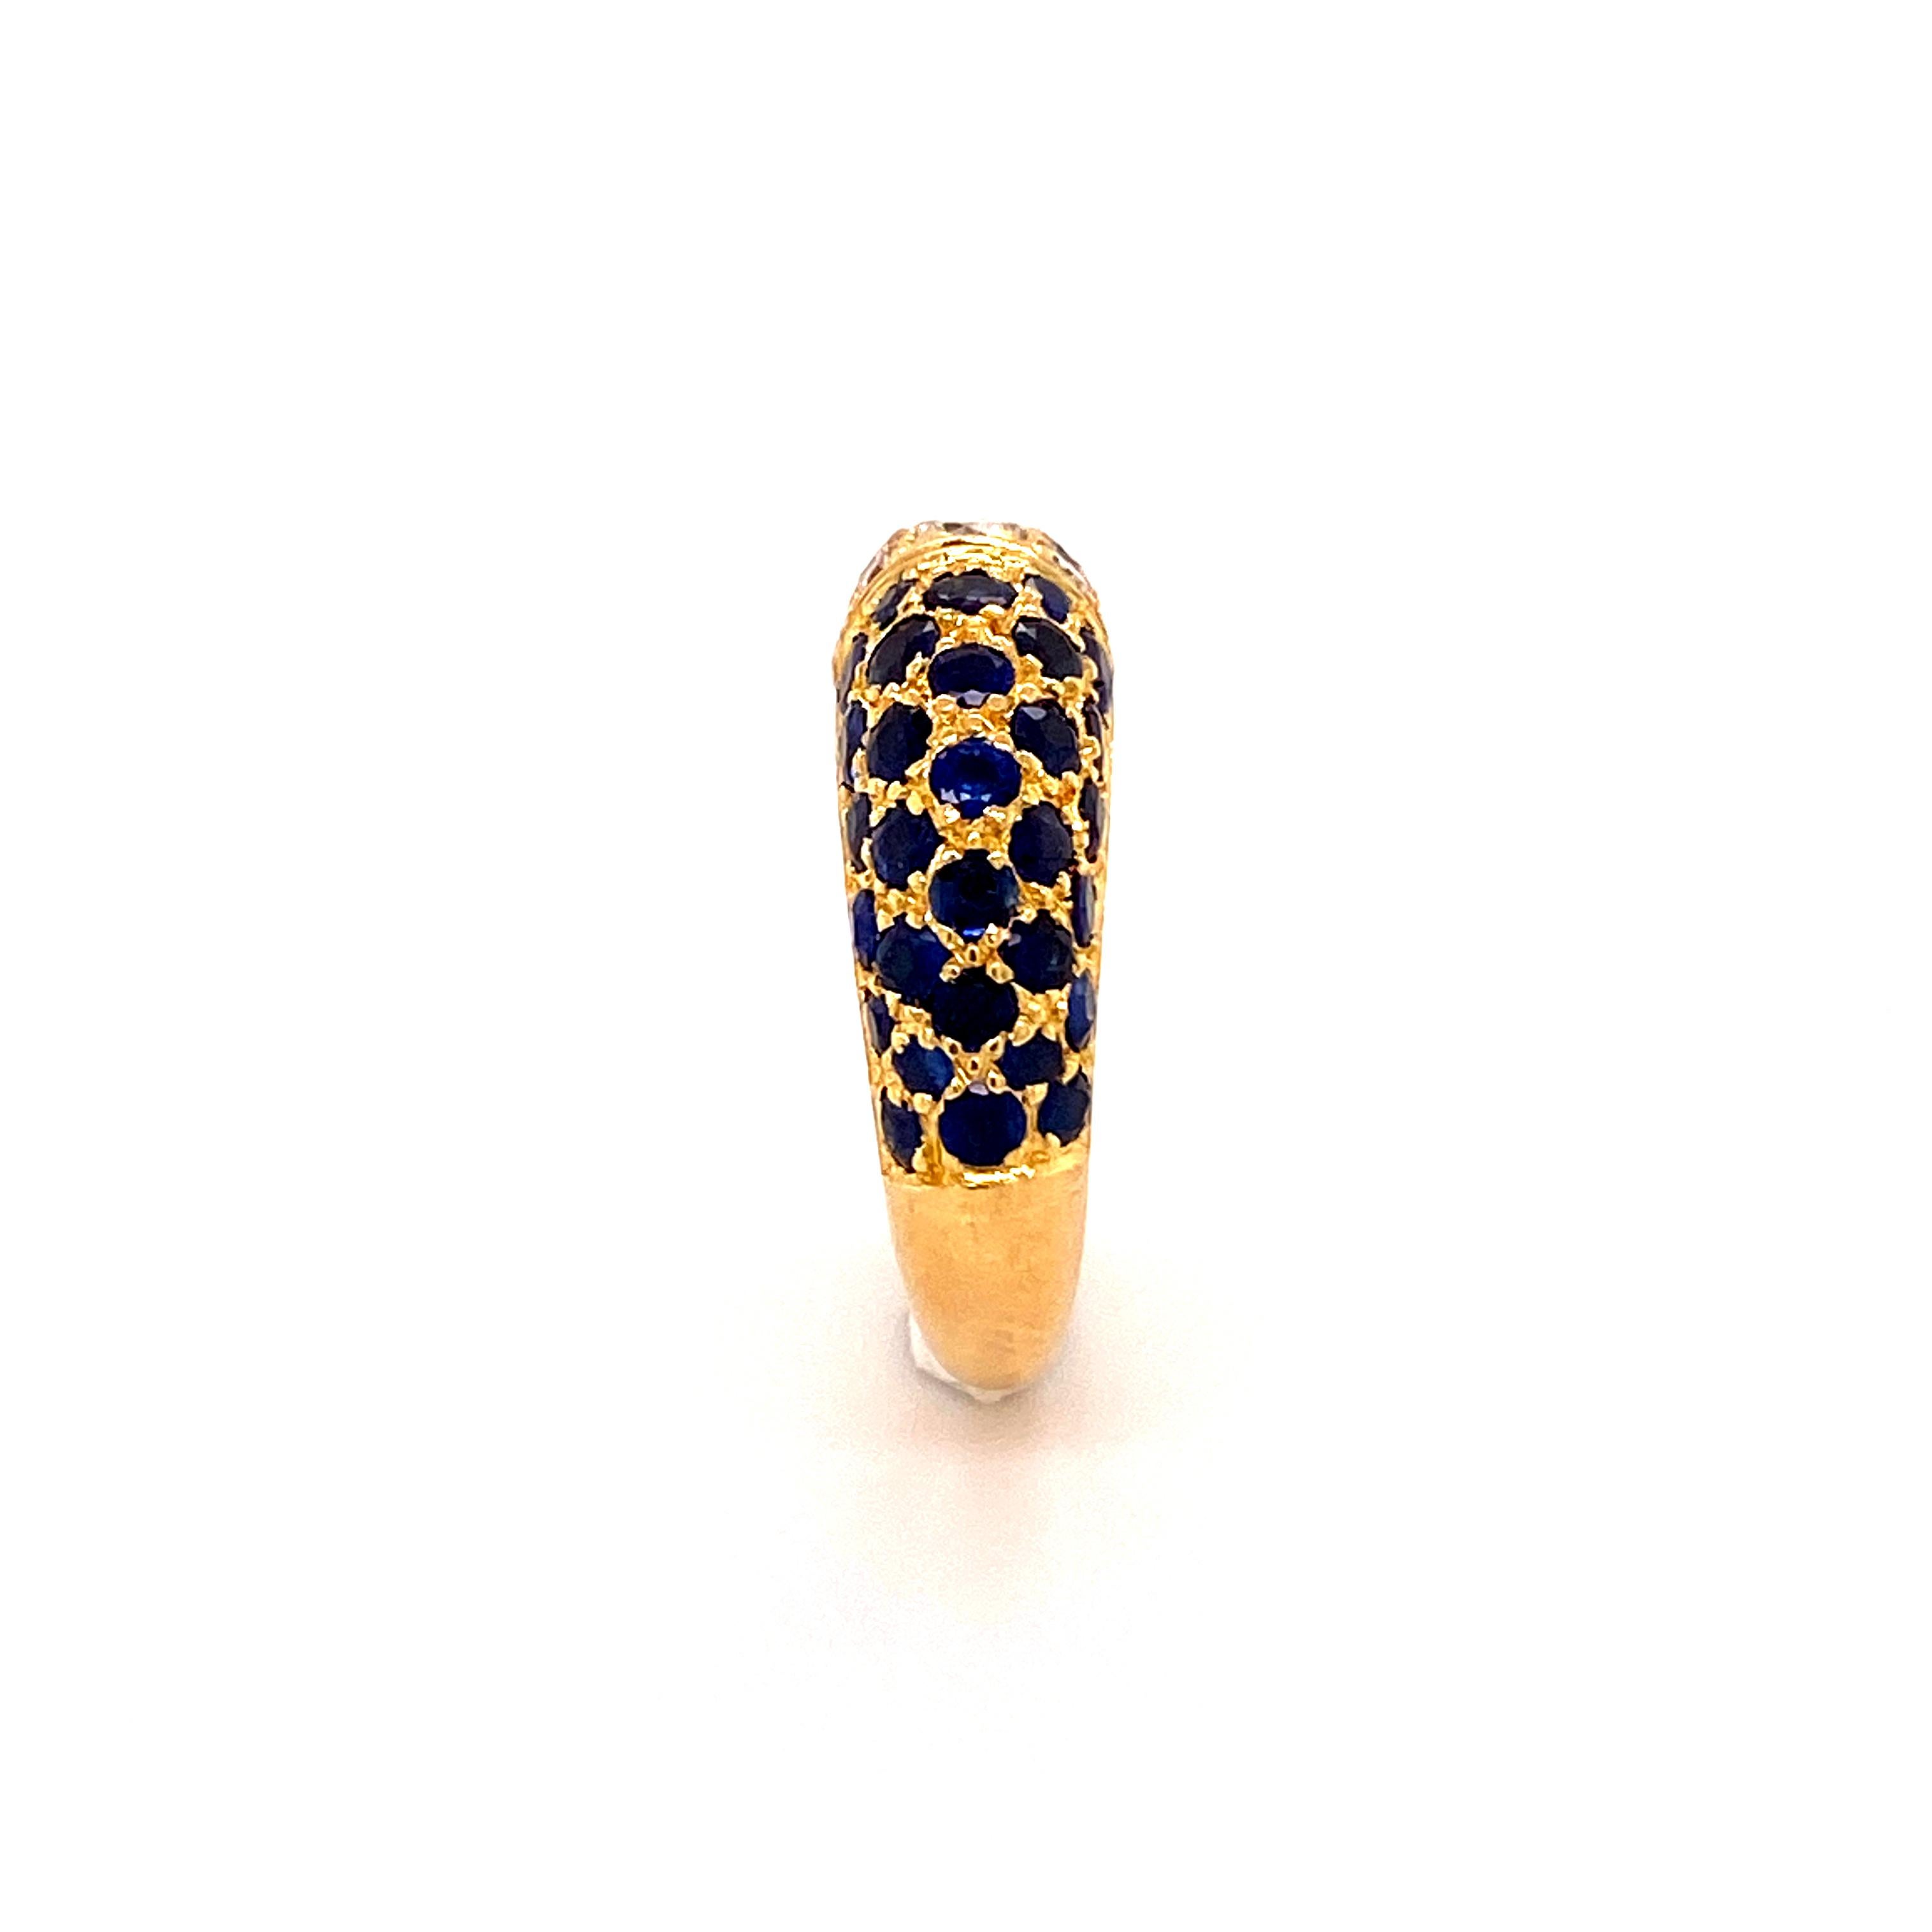 Cartier Sapphire and Diamond Ring in 18 Karat Yellow Gold 1